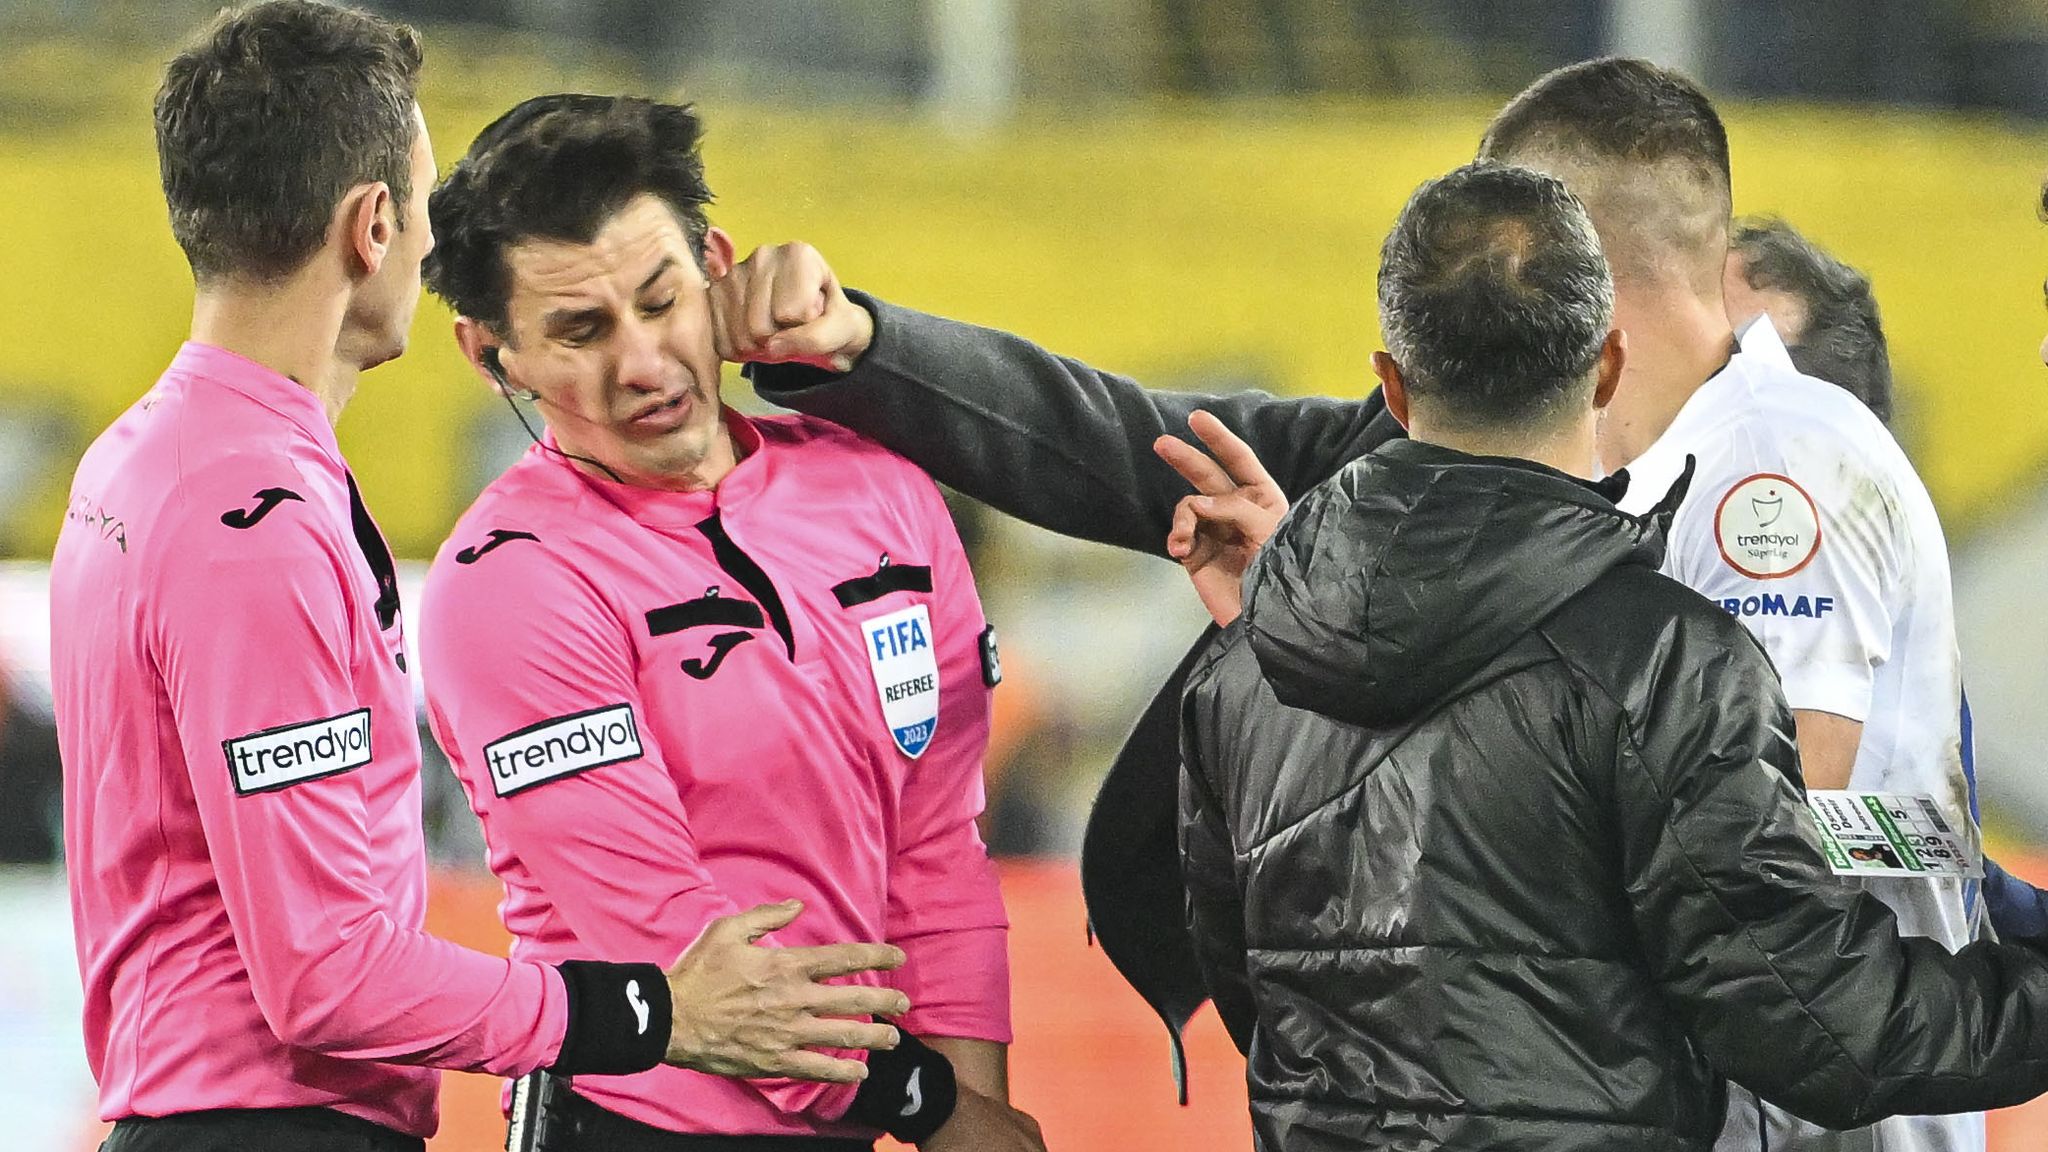 Turkish club president, Faruk Koca handed a lifetime ban after attack on referee landed the match official in hospital